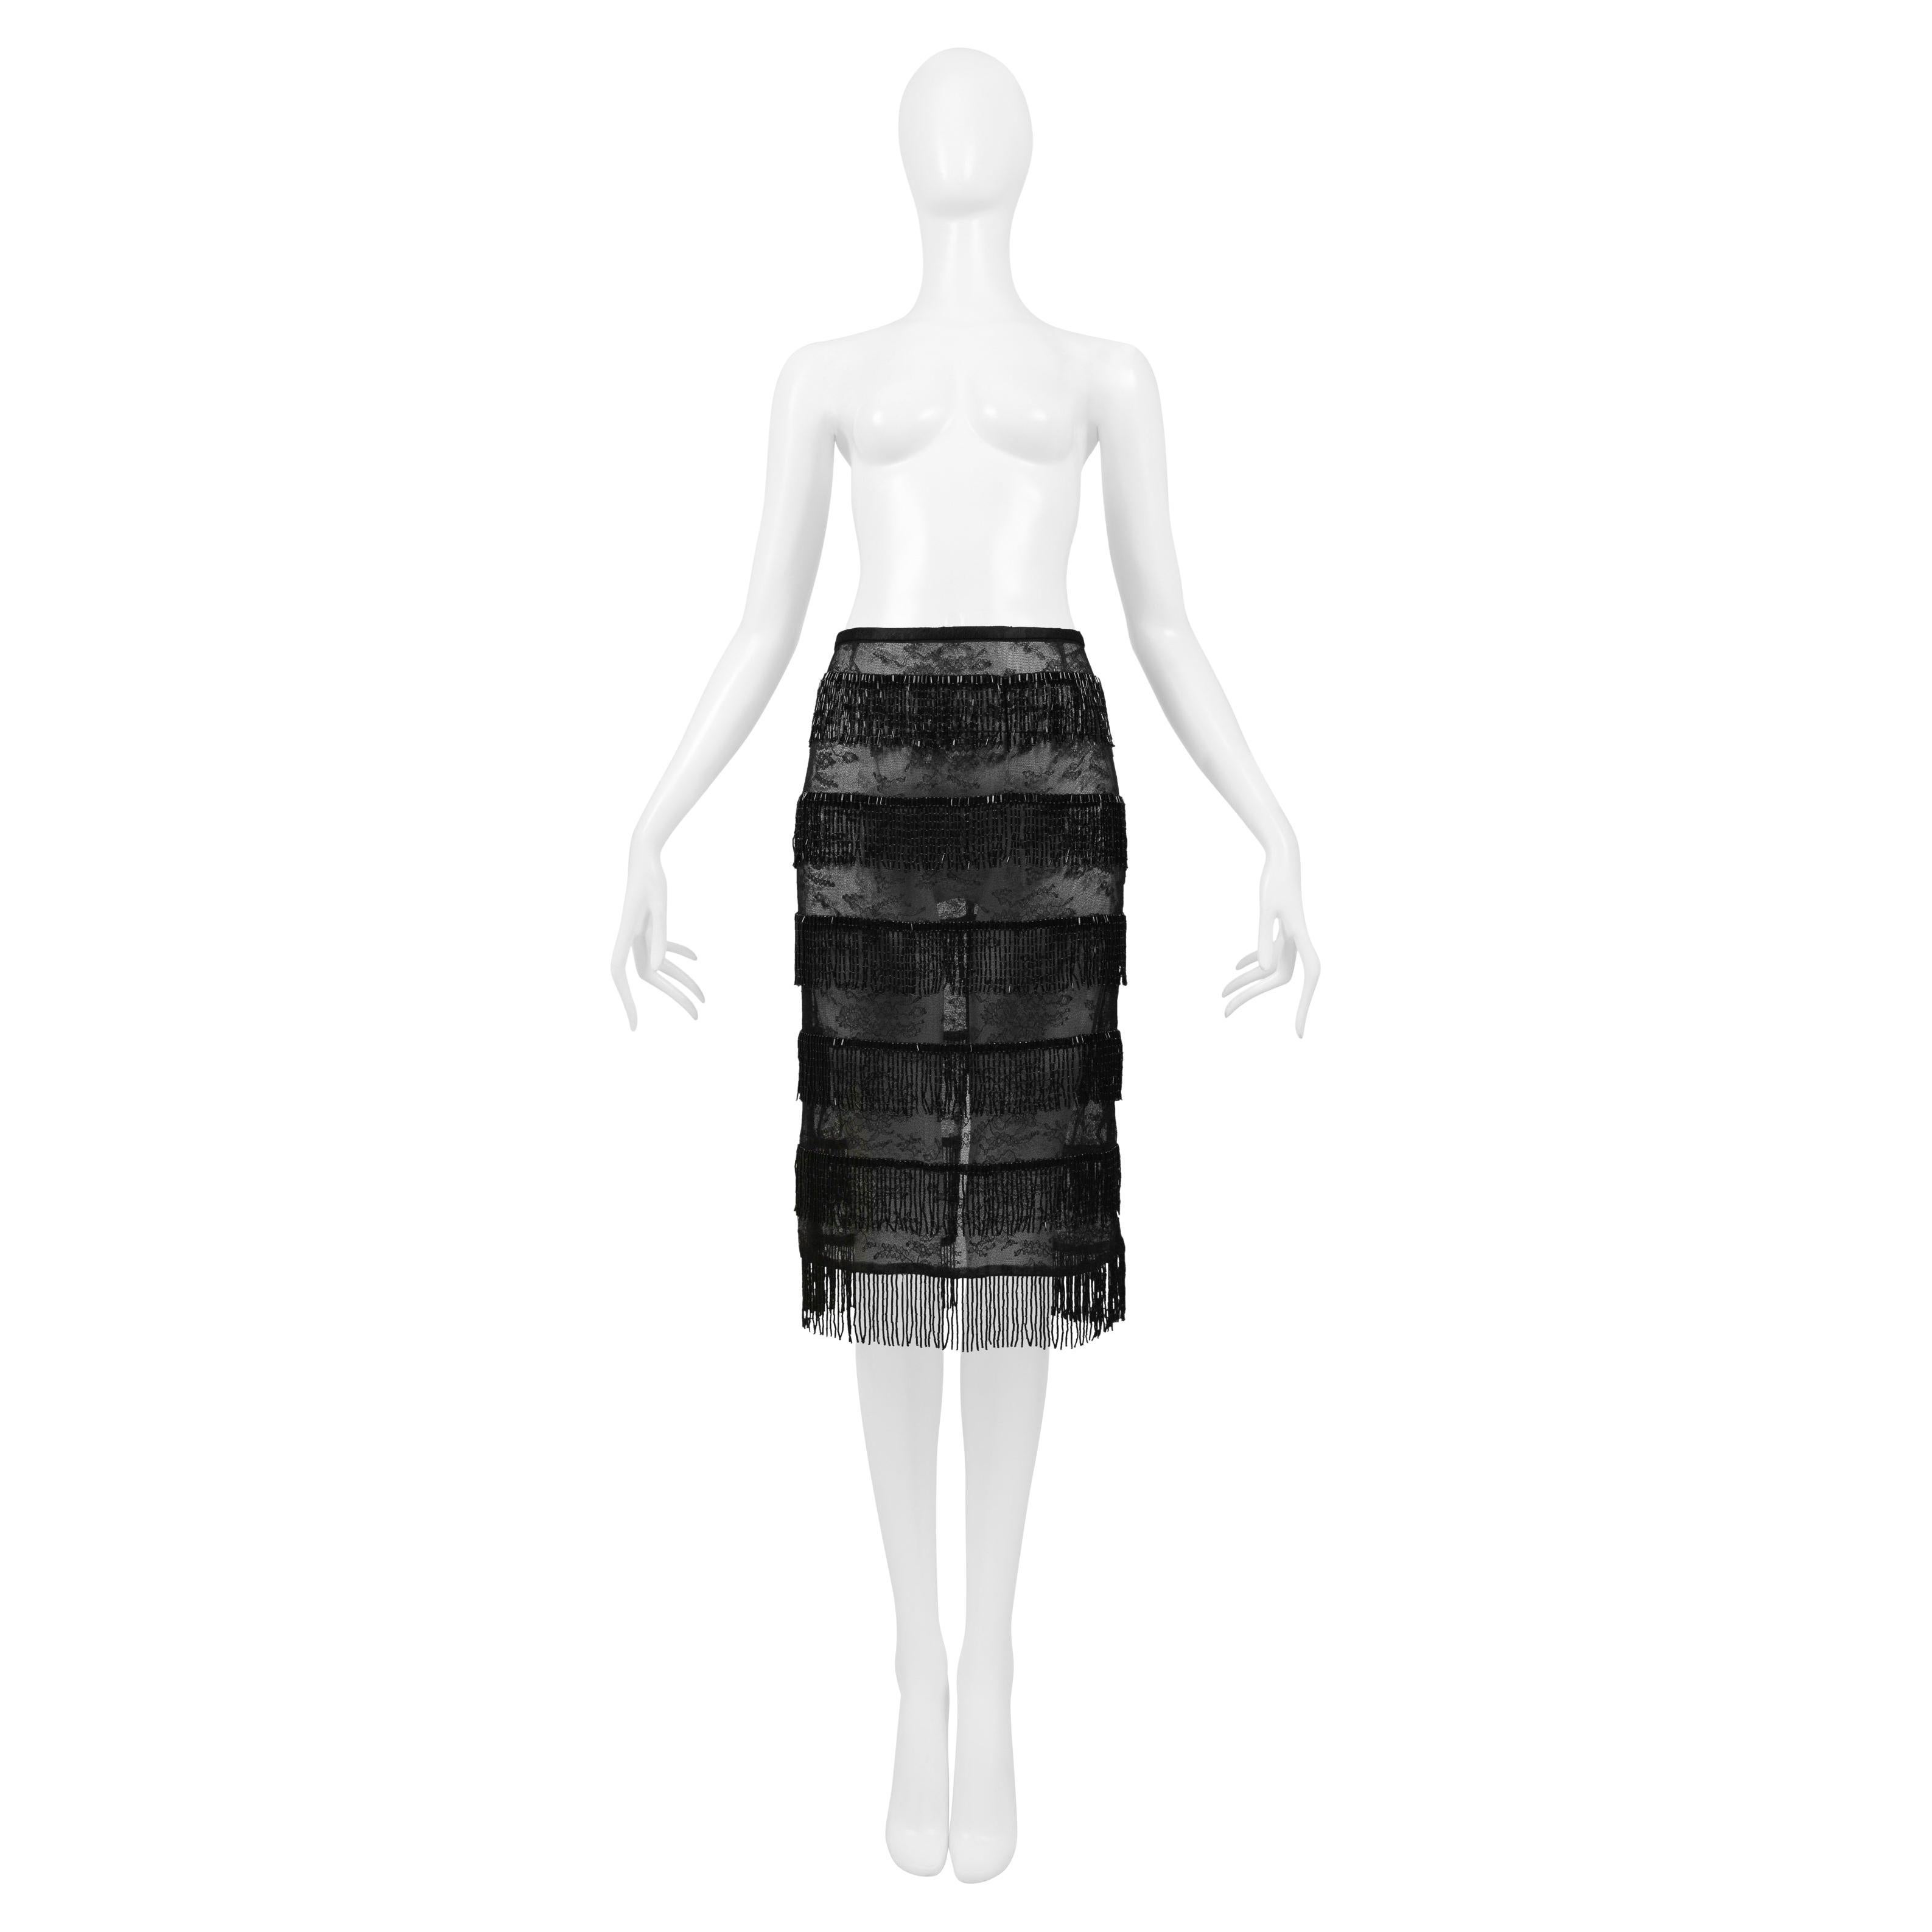 Resurrection Vintage is excited to offer a vintage Dolce & Gabbana black skirt featuring beaded fringe throughout, sheer lace, and an invisible back zipper.
* Dolce & Gabbana
* Size IT 42
*  Fabric: 50% Viscose, 50% Nylon
* 2000 SS Collection
*